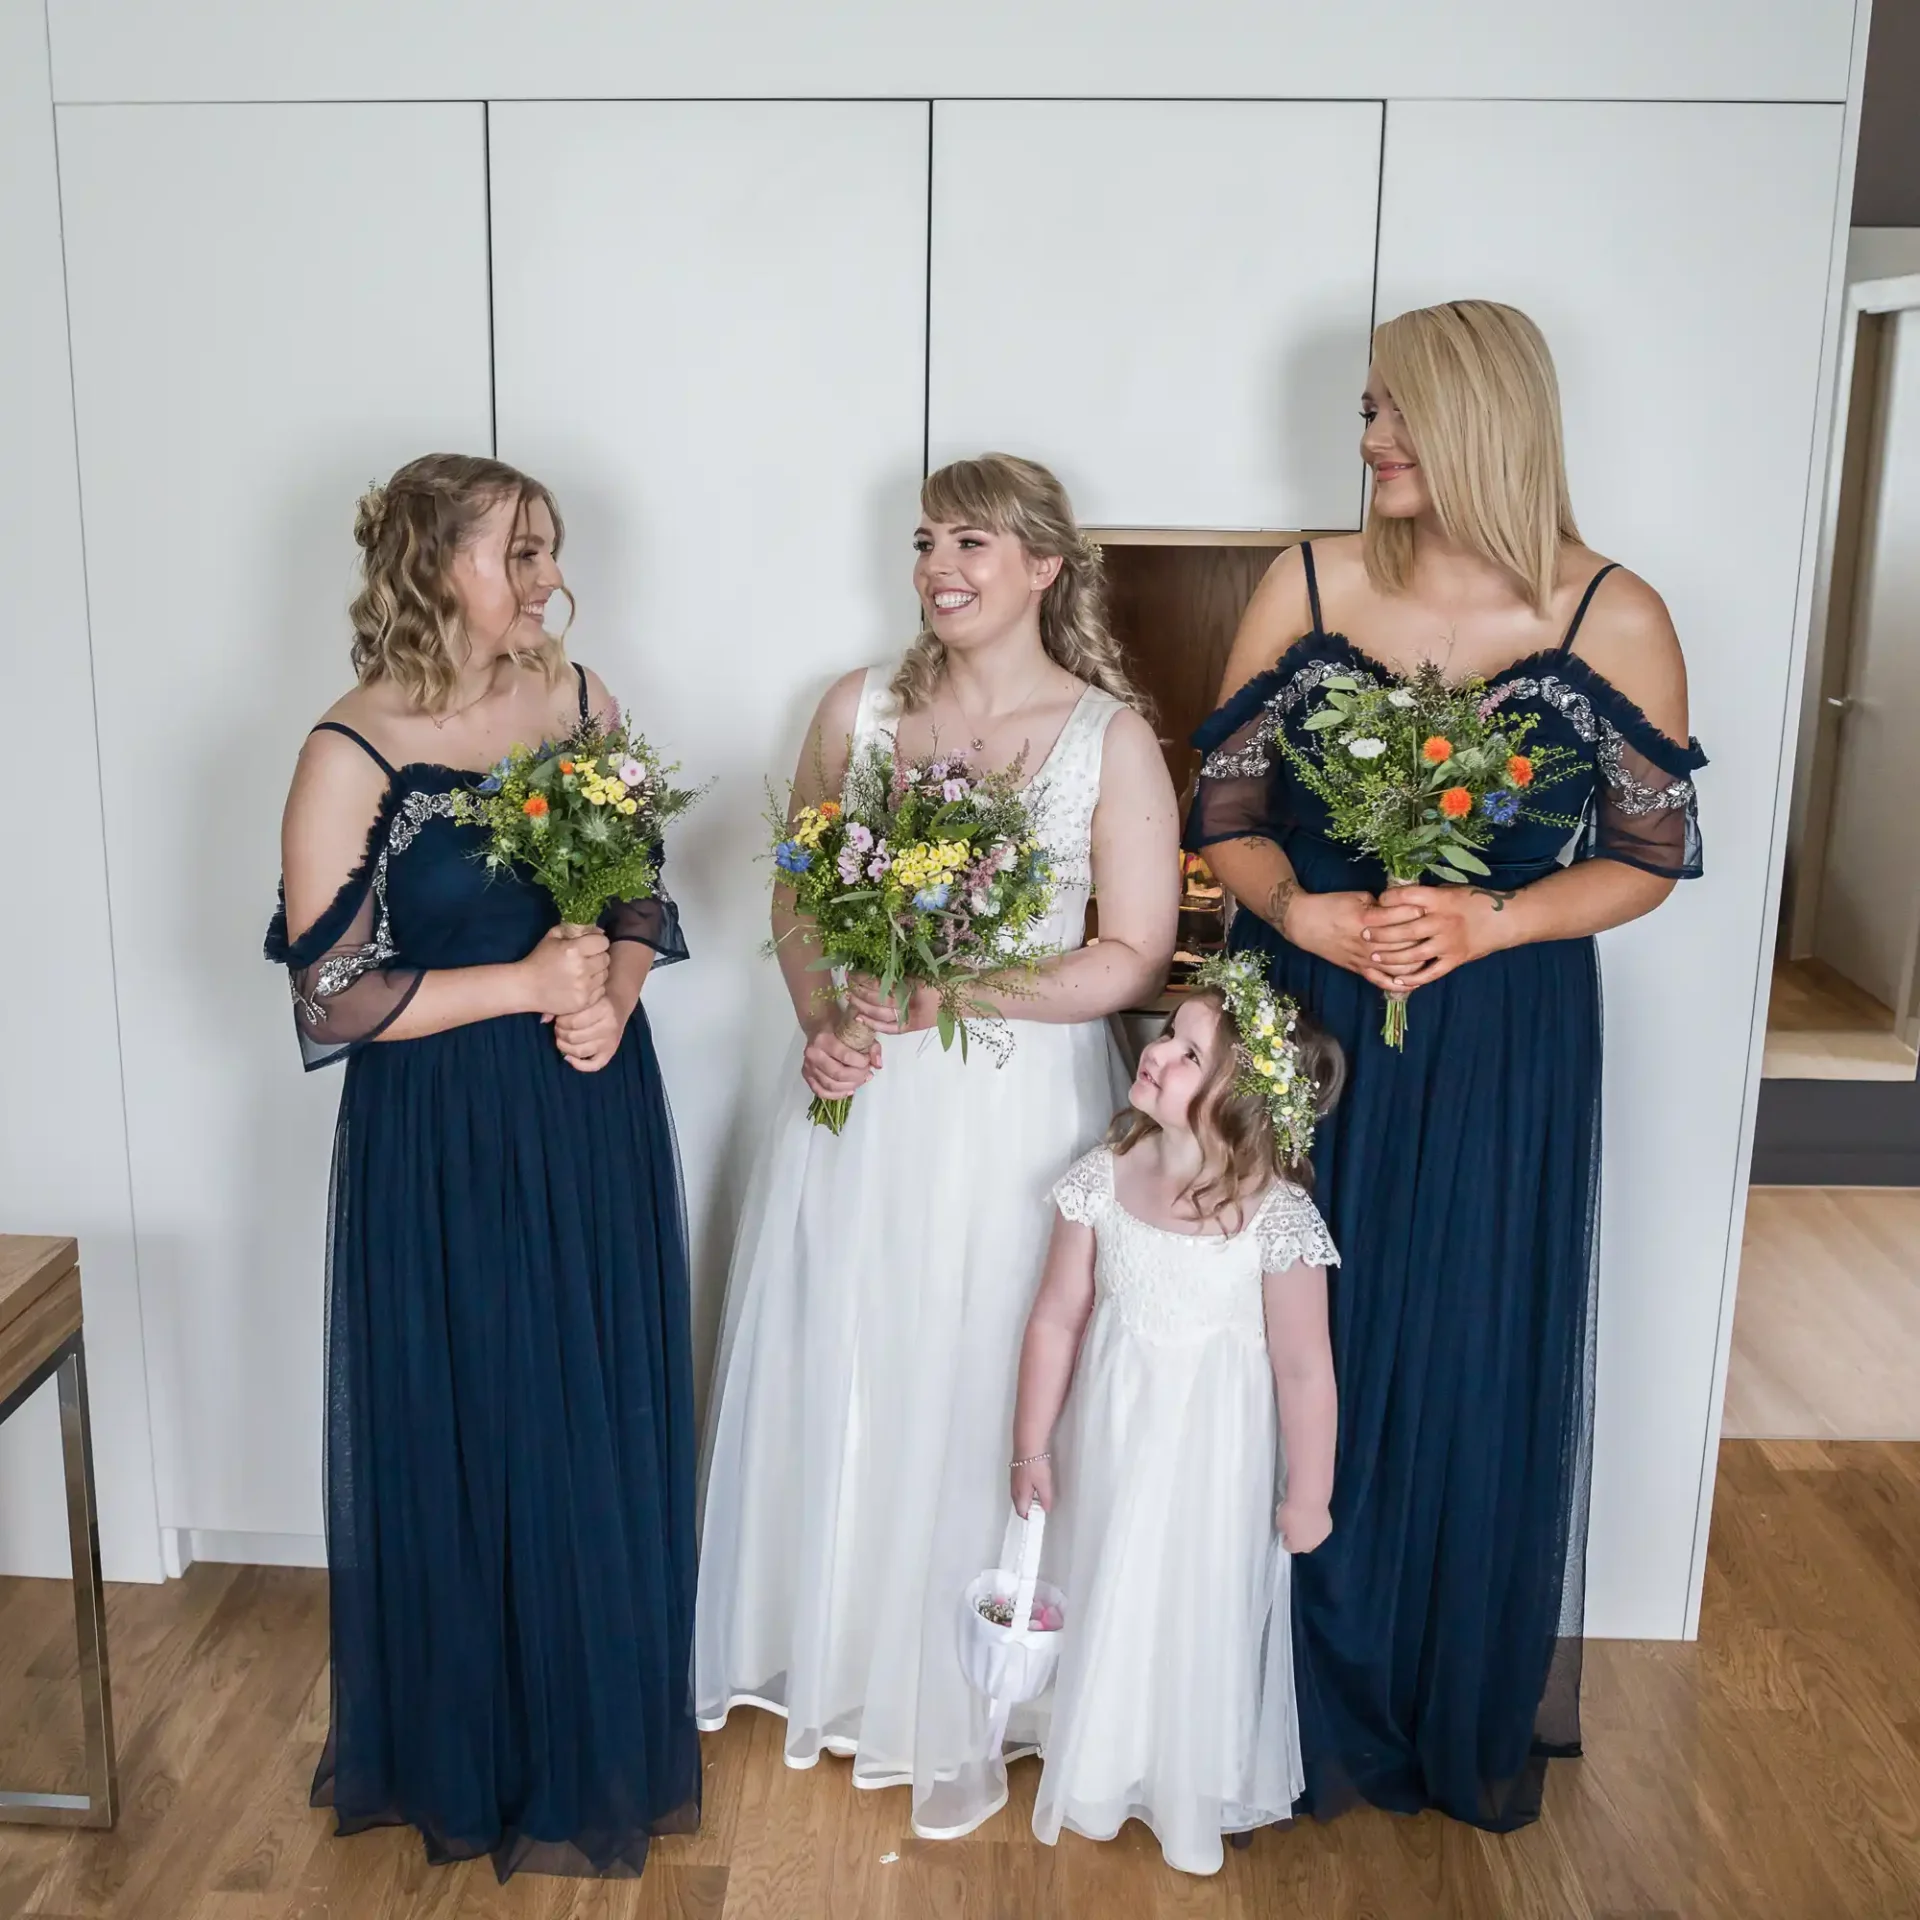 A bride in a white dress and three bridesmaids in navy dresses, holding bouquets, smiling and interacting joyfully indoors.